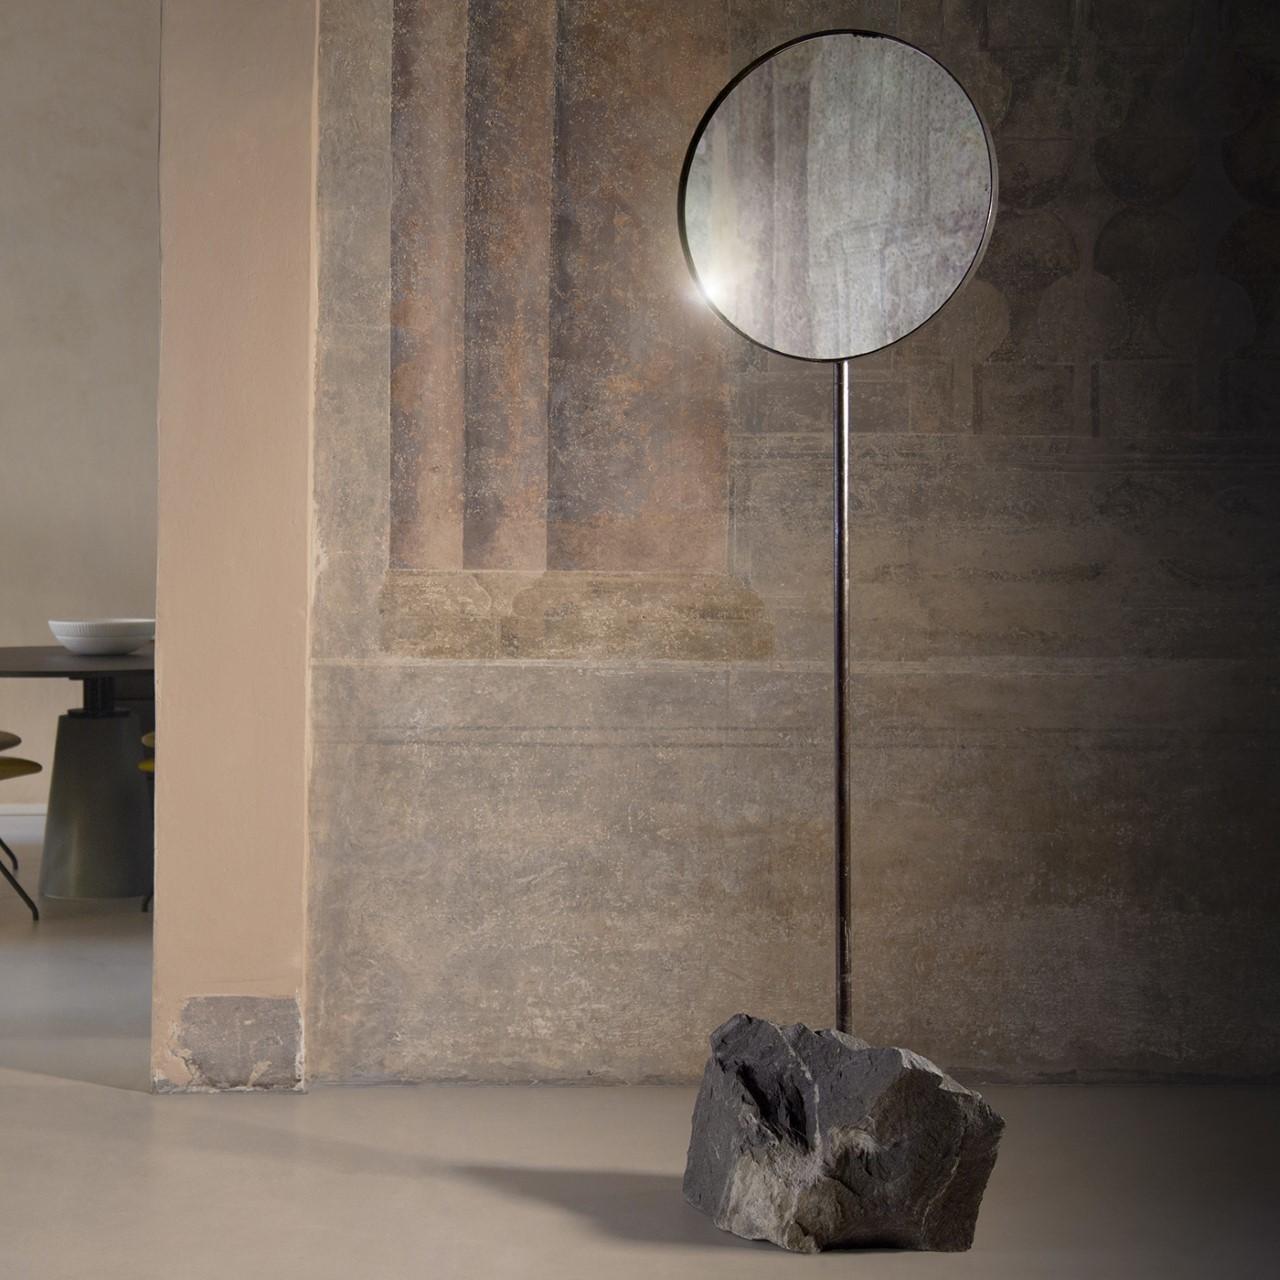 This one-of-a-kind, limited-edition floor mirror boasts a splendid base in white Perlino marble, a sedimentary rock distinctive for the presence of microfossils and other textural treasures sourced in the Asiago Plateau near Vicenza. The stone is